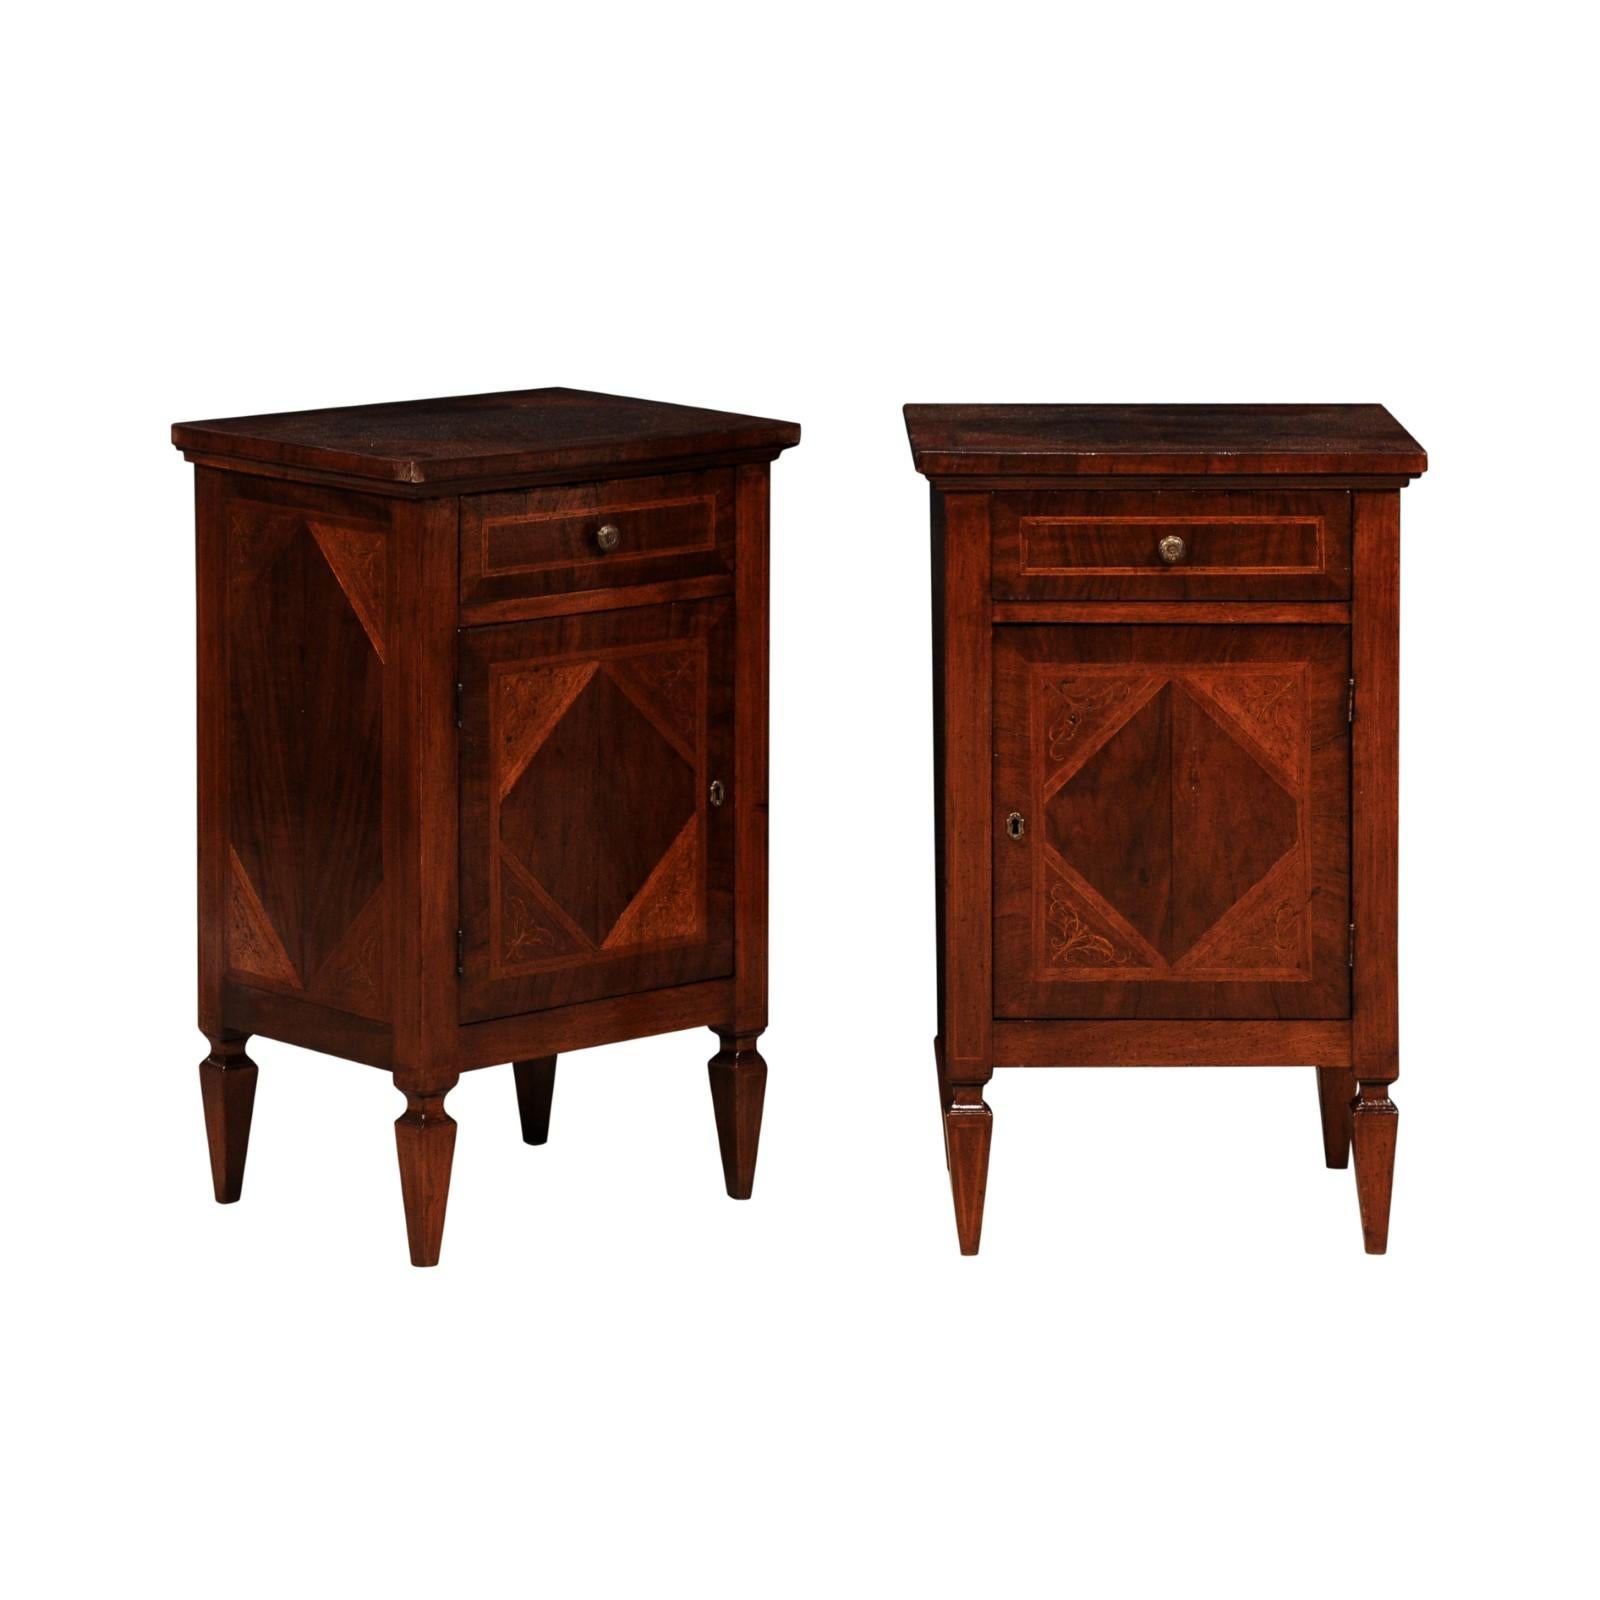 A pair of Italian walnut nightstand tables from circa 1900 with mahogany inlay, scrolling foliage marquetry, single drawers and single doors. Step back in time with this exquisite pair of Italian walnut nightstand tables from circa 1900, a testament